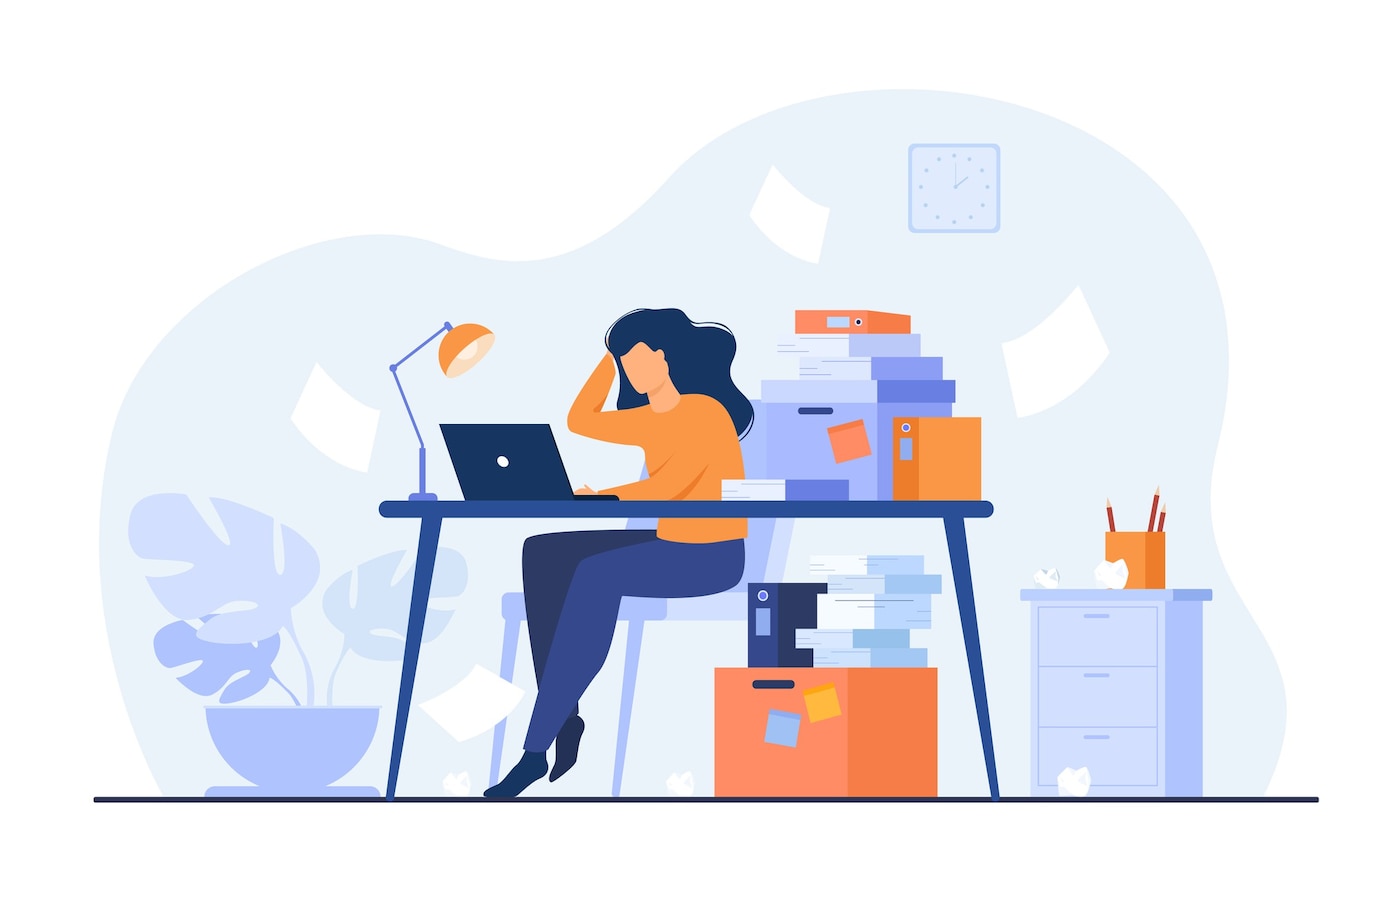 tired-overworked-secretary-accountant-working-laptop-near-pile-folders-throwing-papers-vector-illustration-stress-work-workaholic-busy-office-employee-concept_74855-13264